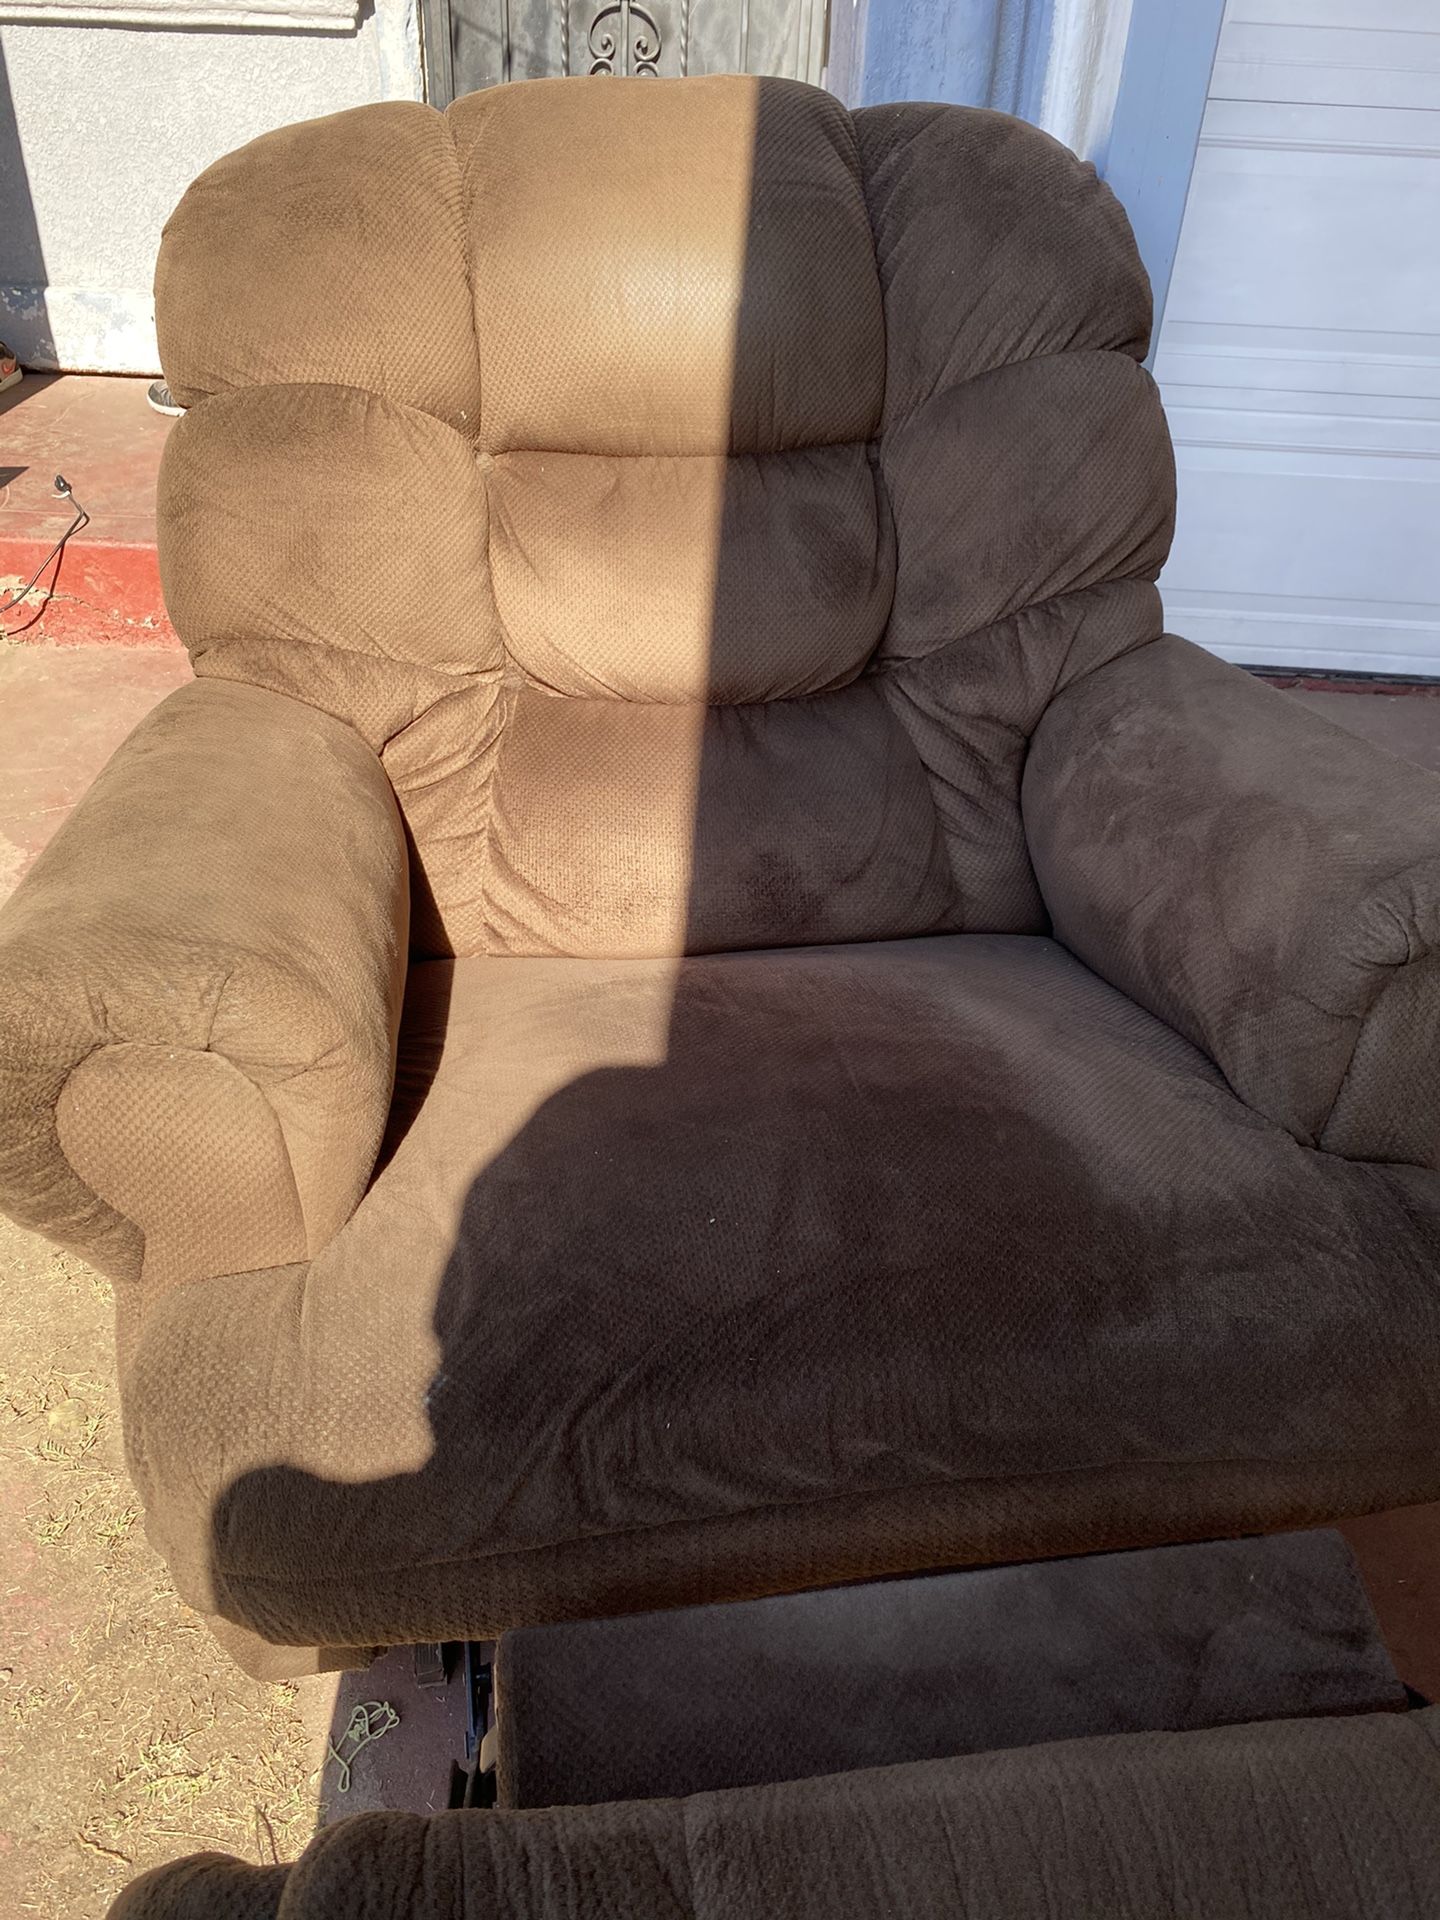 Lazy boy recliner works good and good condition (no pets and no smoking)